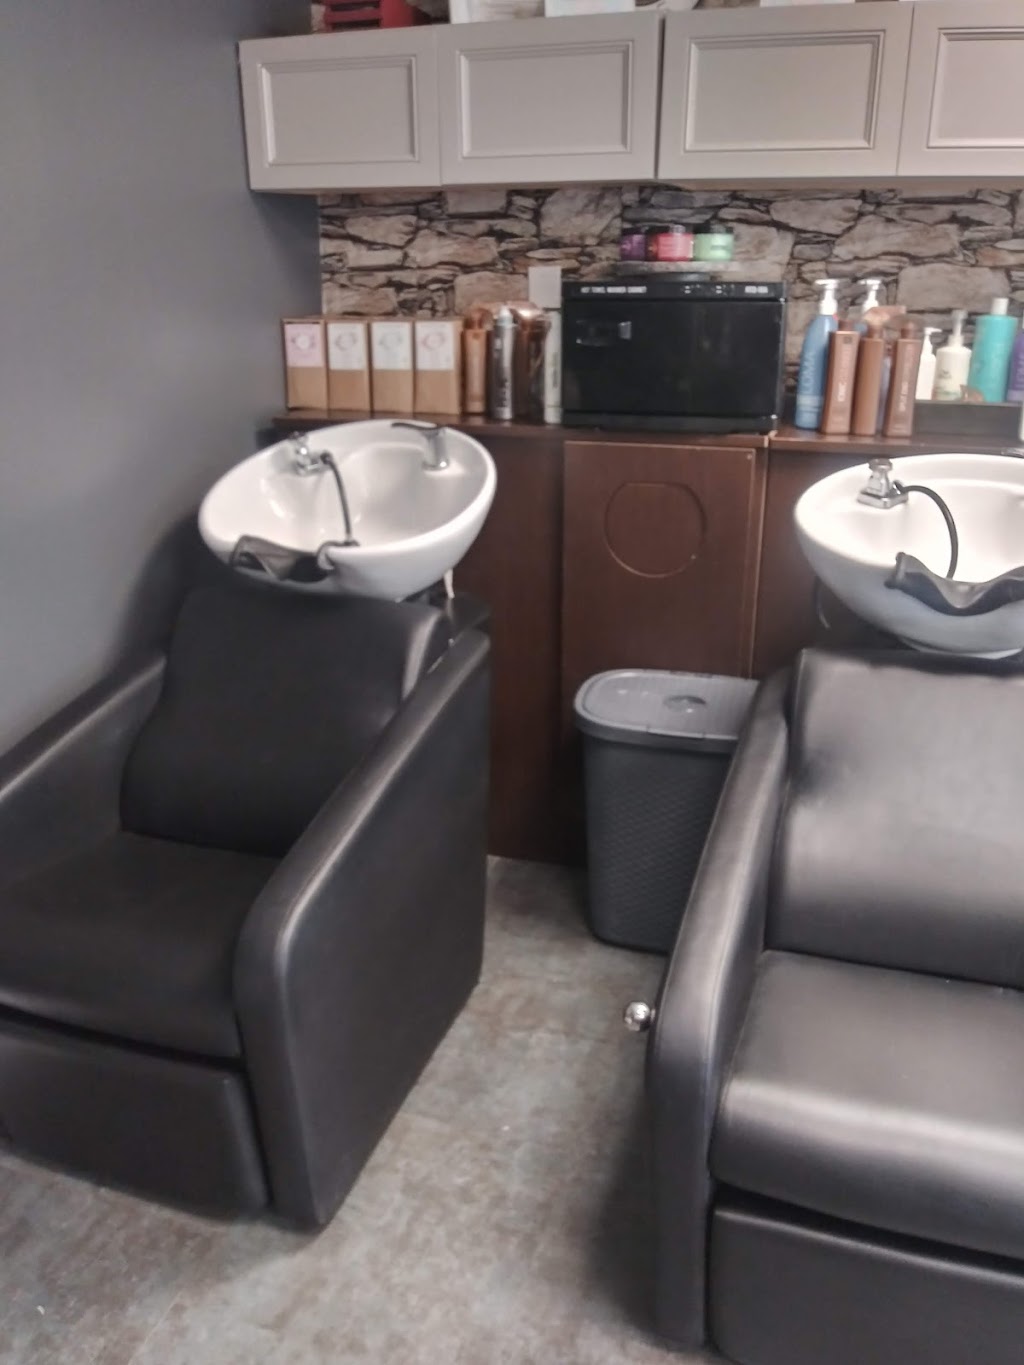 River Rock Salon and Spa | 1059 Old York Rd, Ringoes, NJ 08551 | Phone: (908) 892-3650